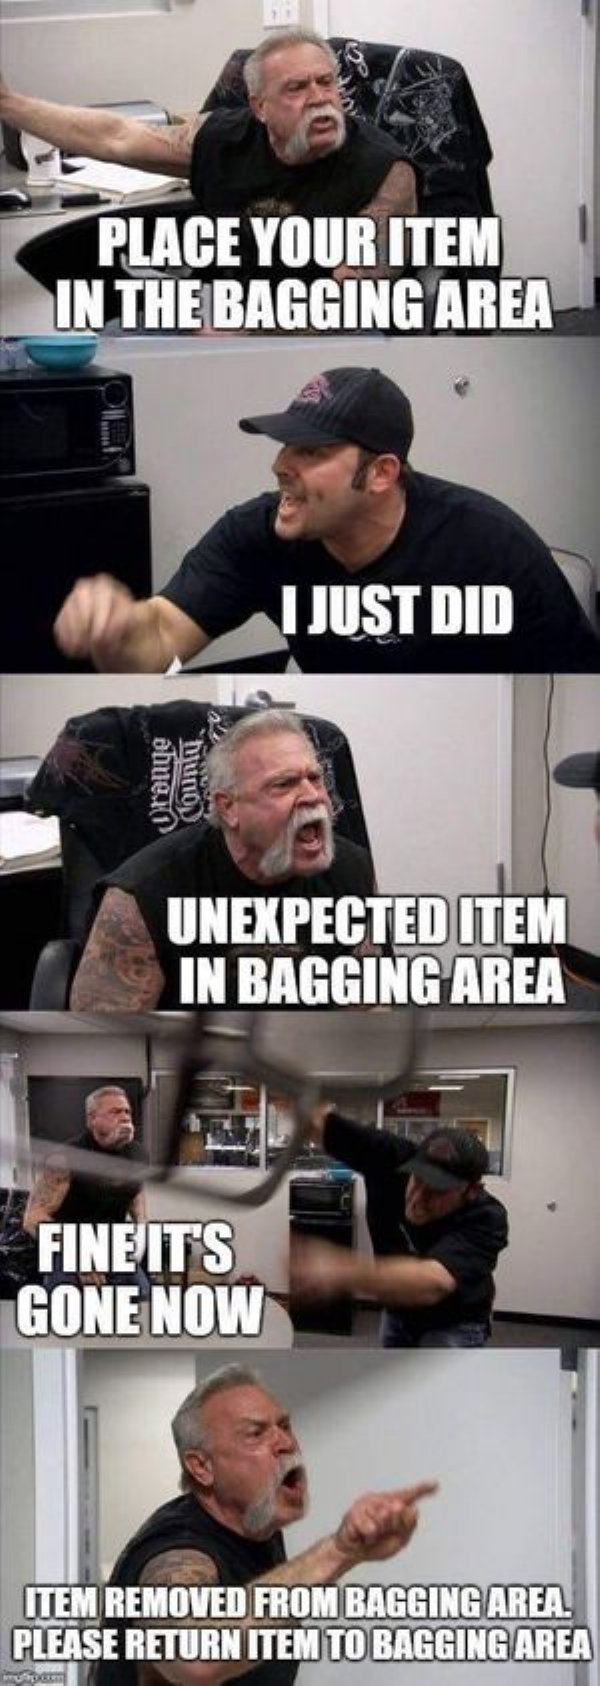 self checkout meme - Place Your Item In The Bagging Area I Just Did dhue, hunos Unexpected Item In Bagging Area Fine Its Gone Now Item Removed From Bagging Area. Please Return Item To Bagging Area